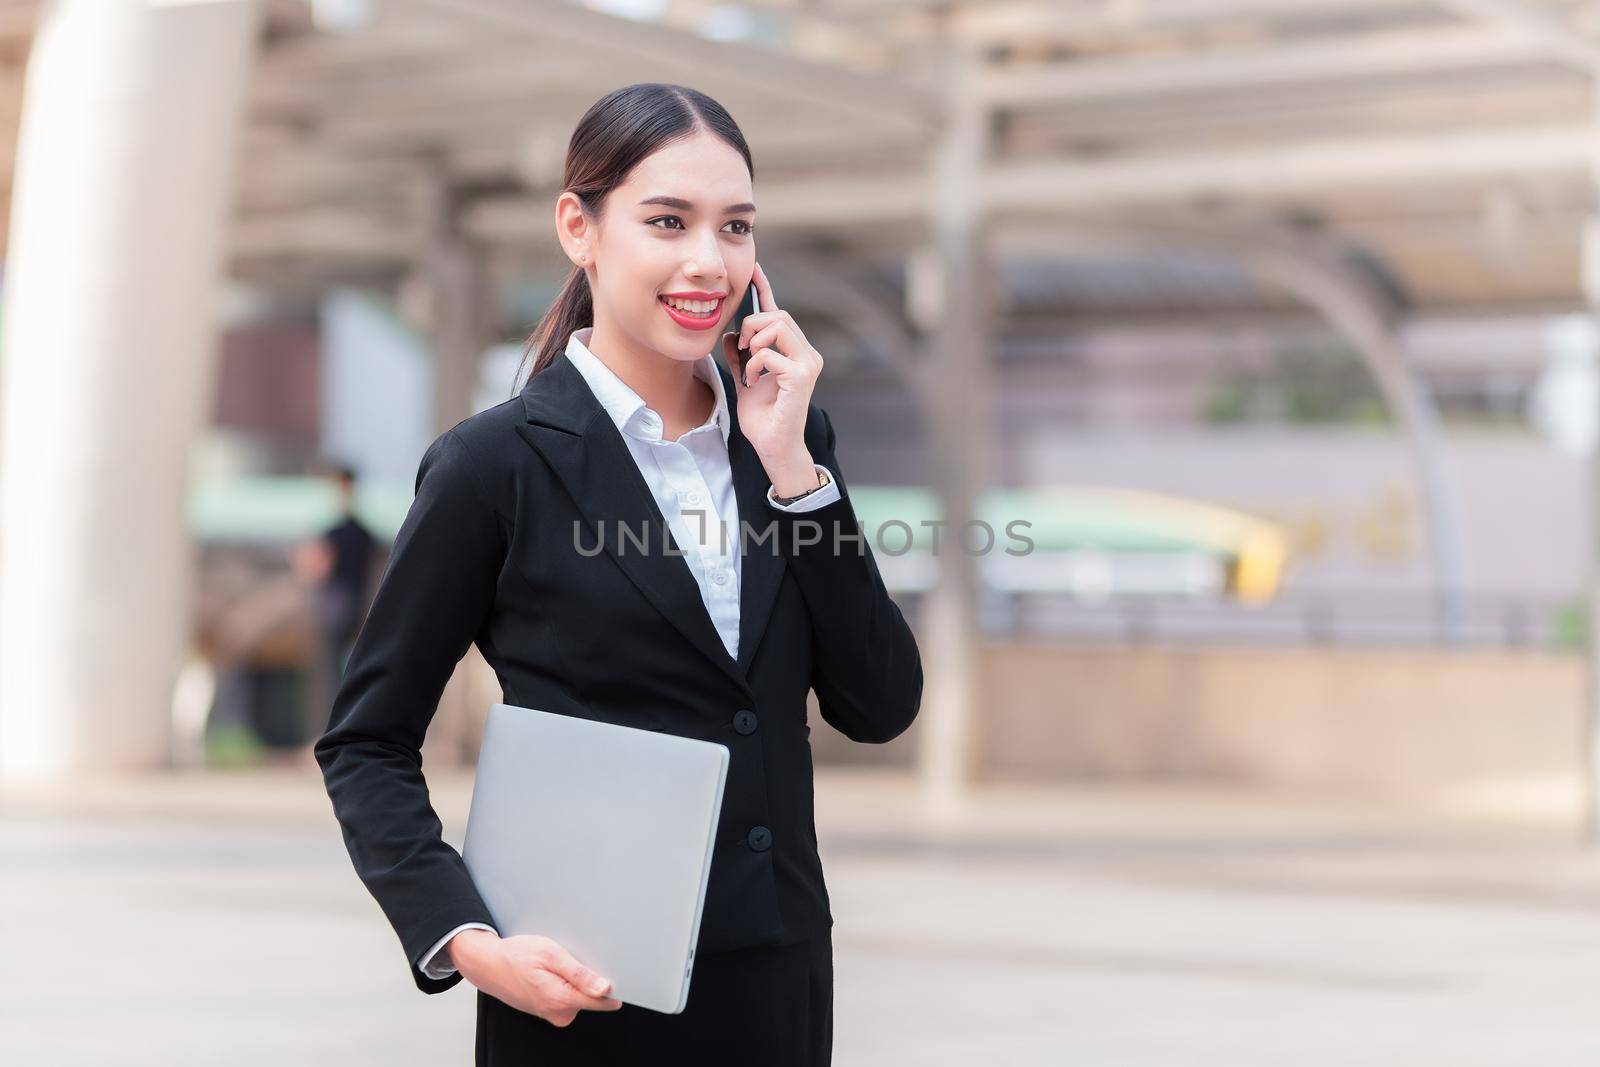 Attractive businesswoman talking on mobile phone with client.